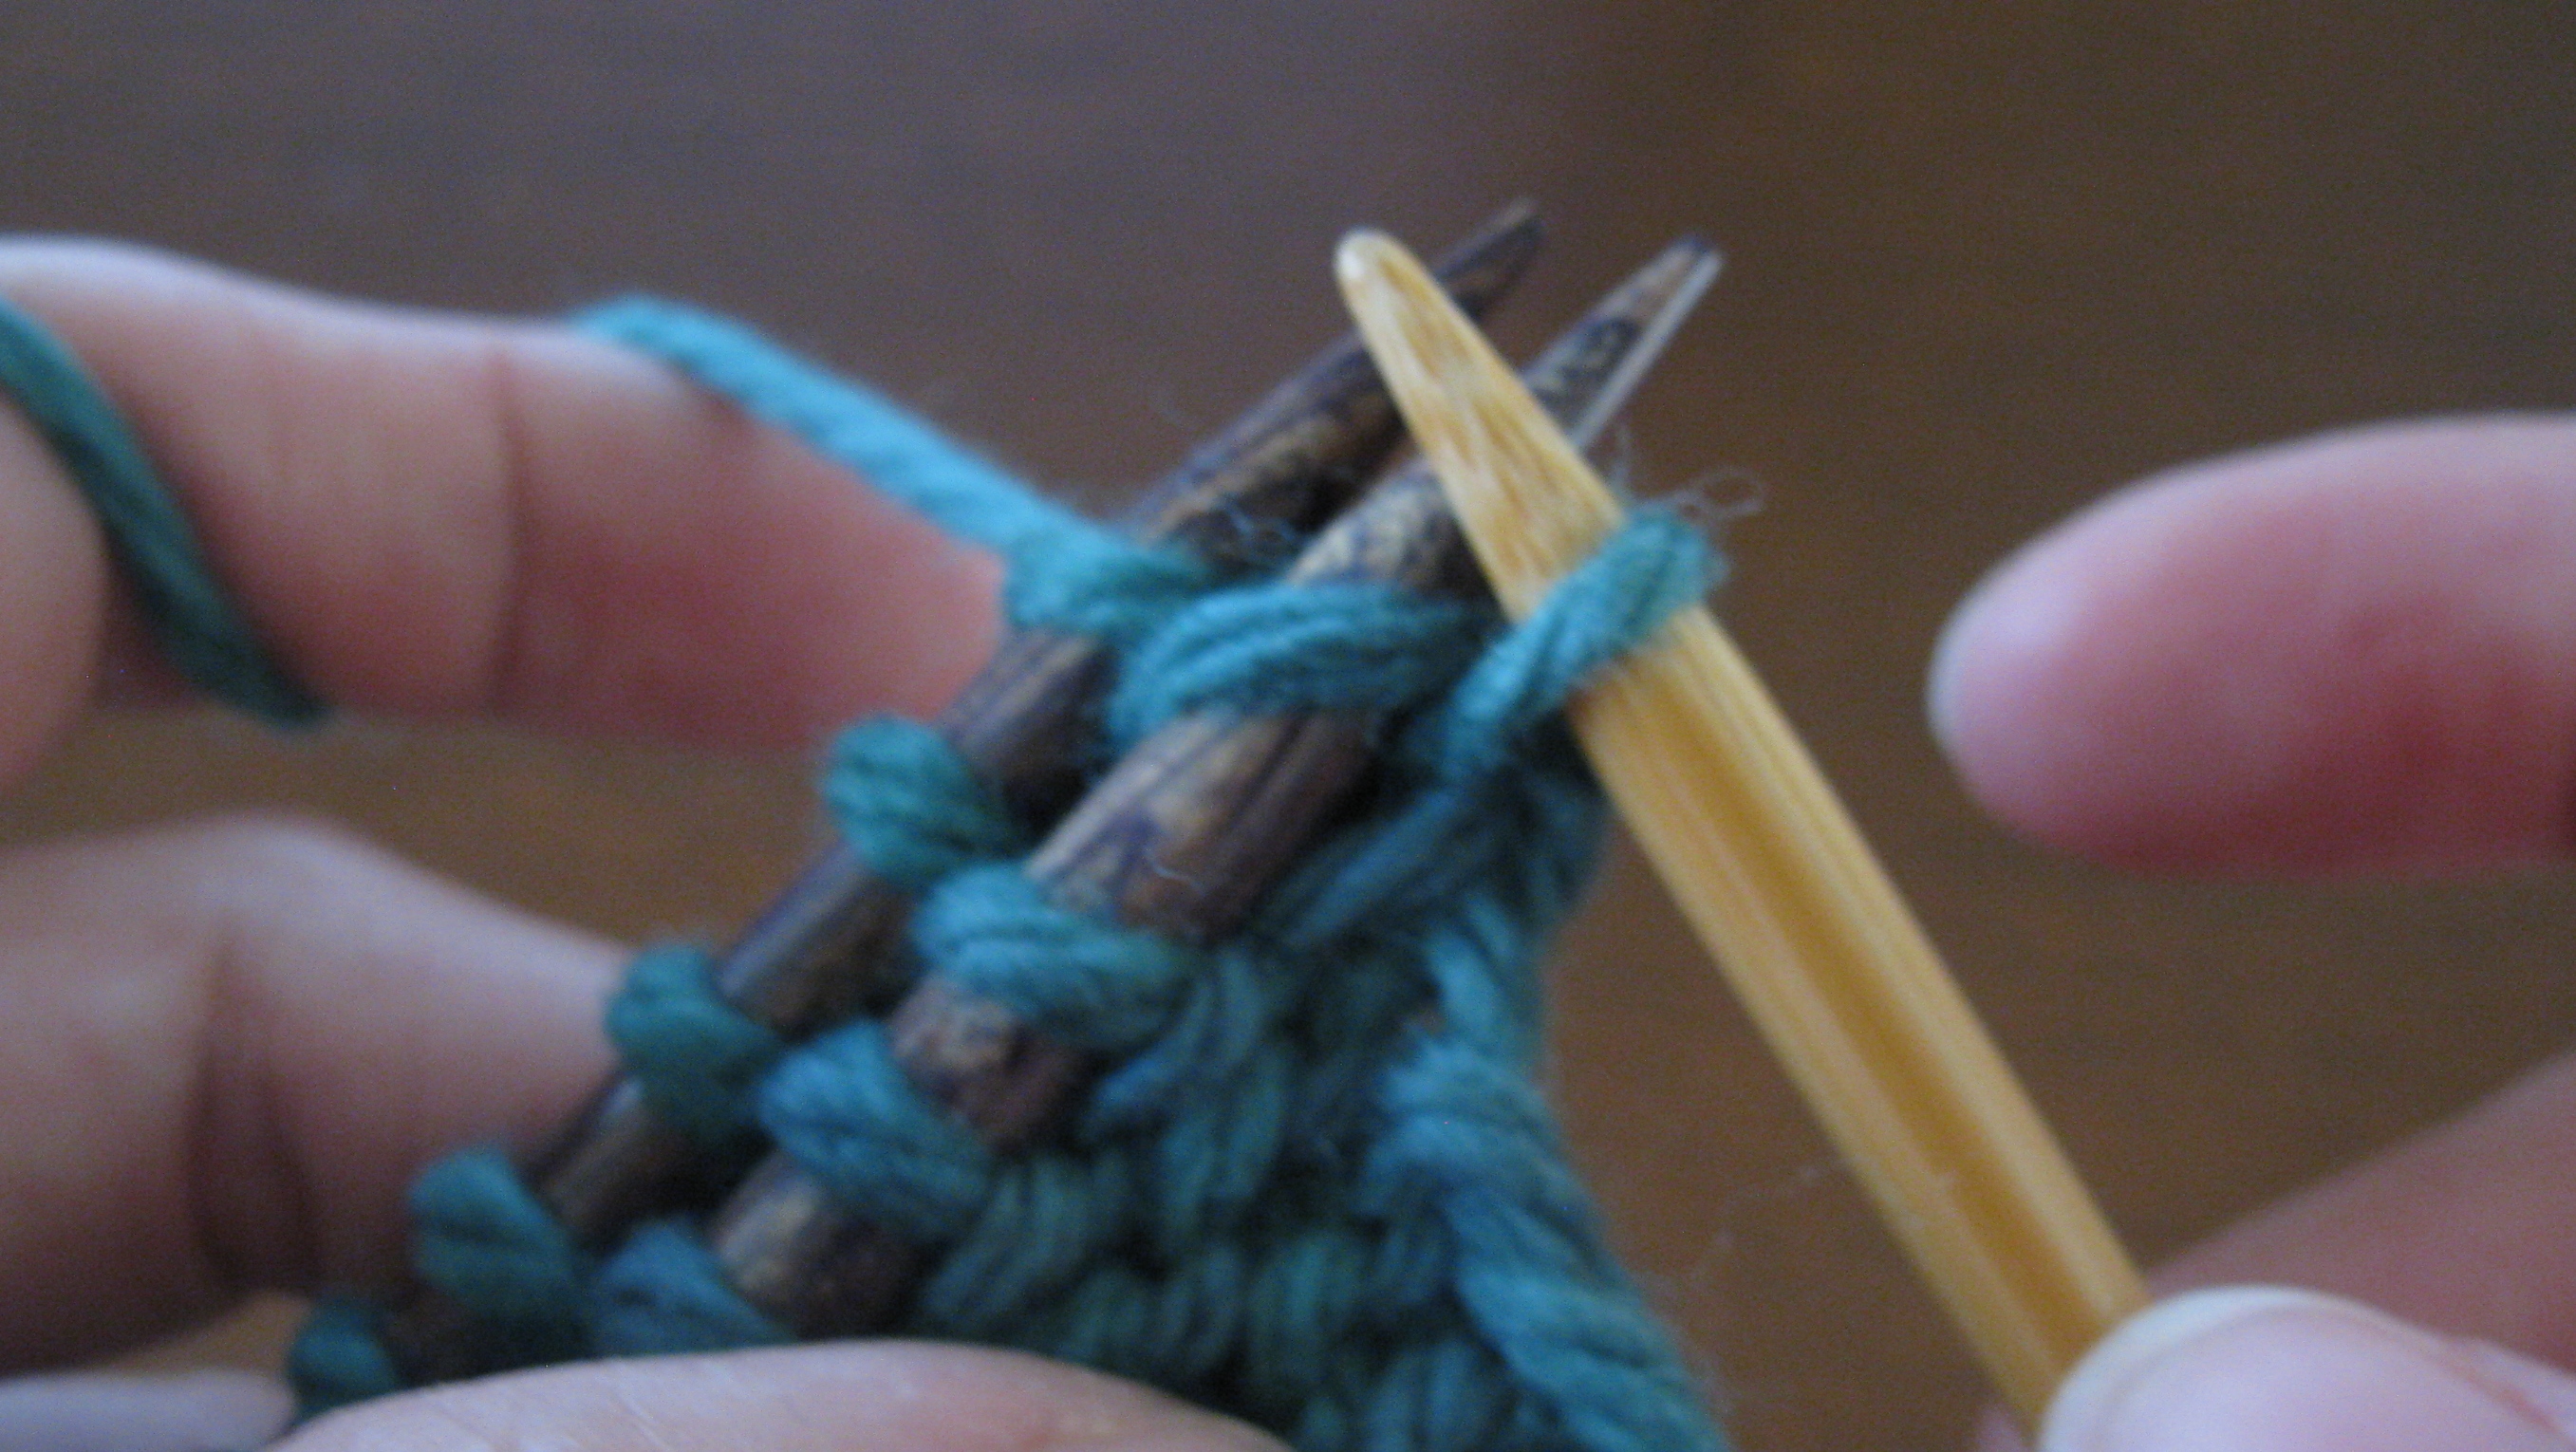 What are some knitting stitch abbreviations?